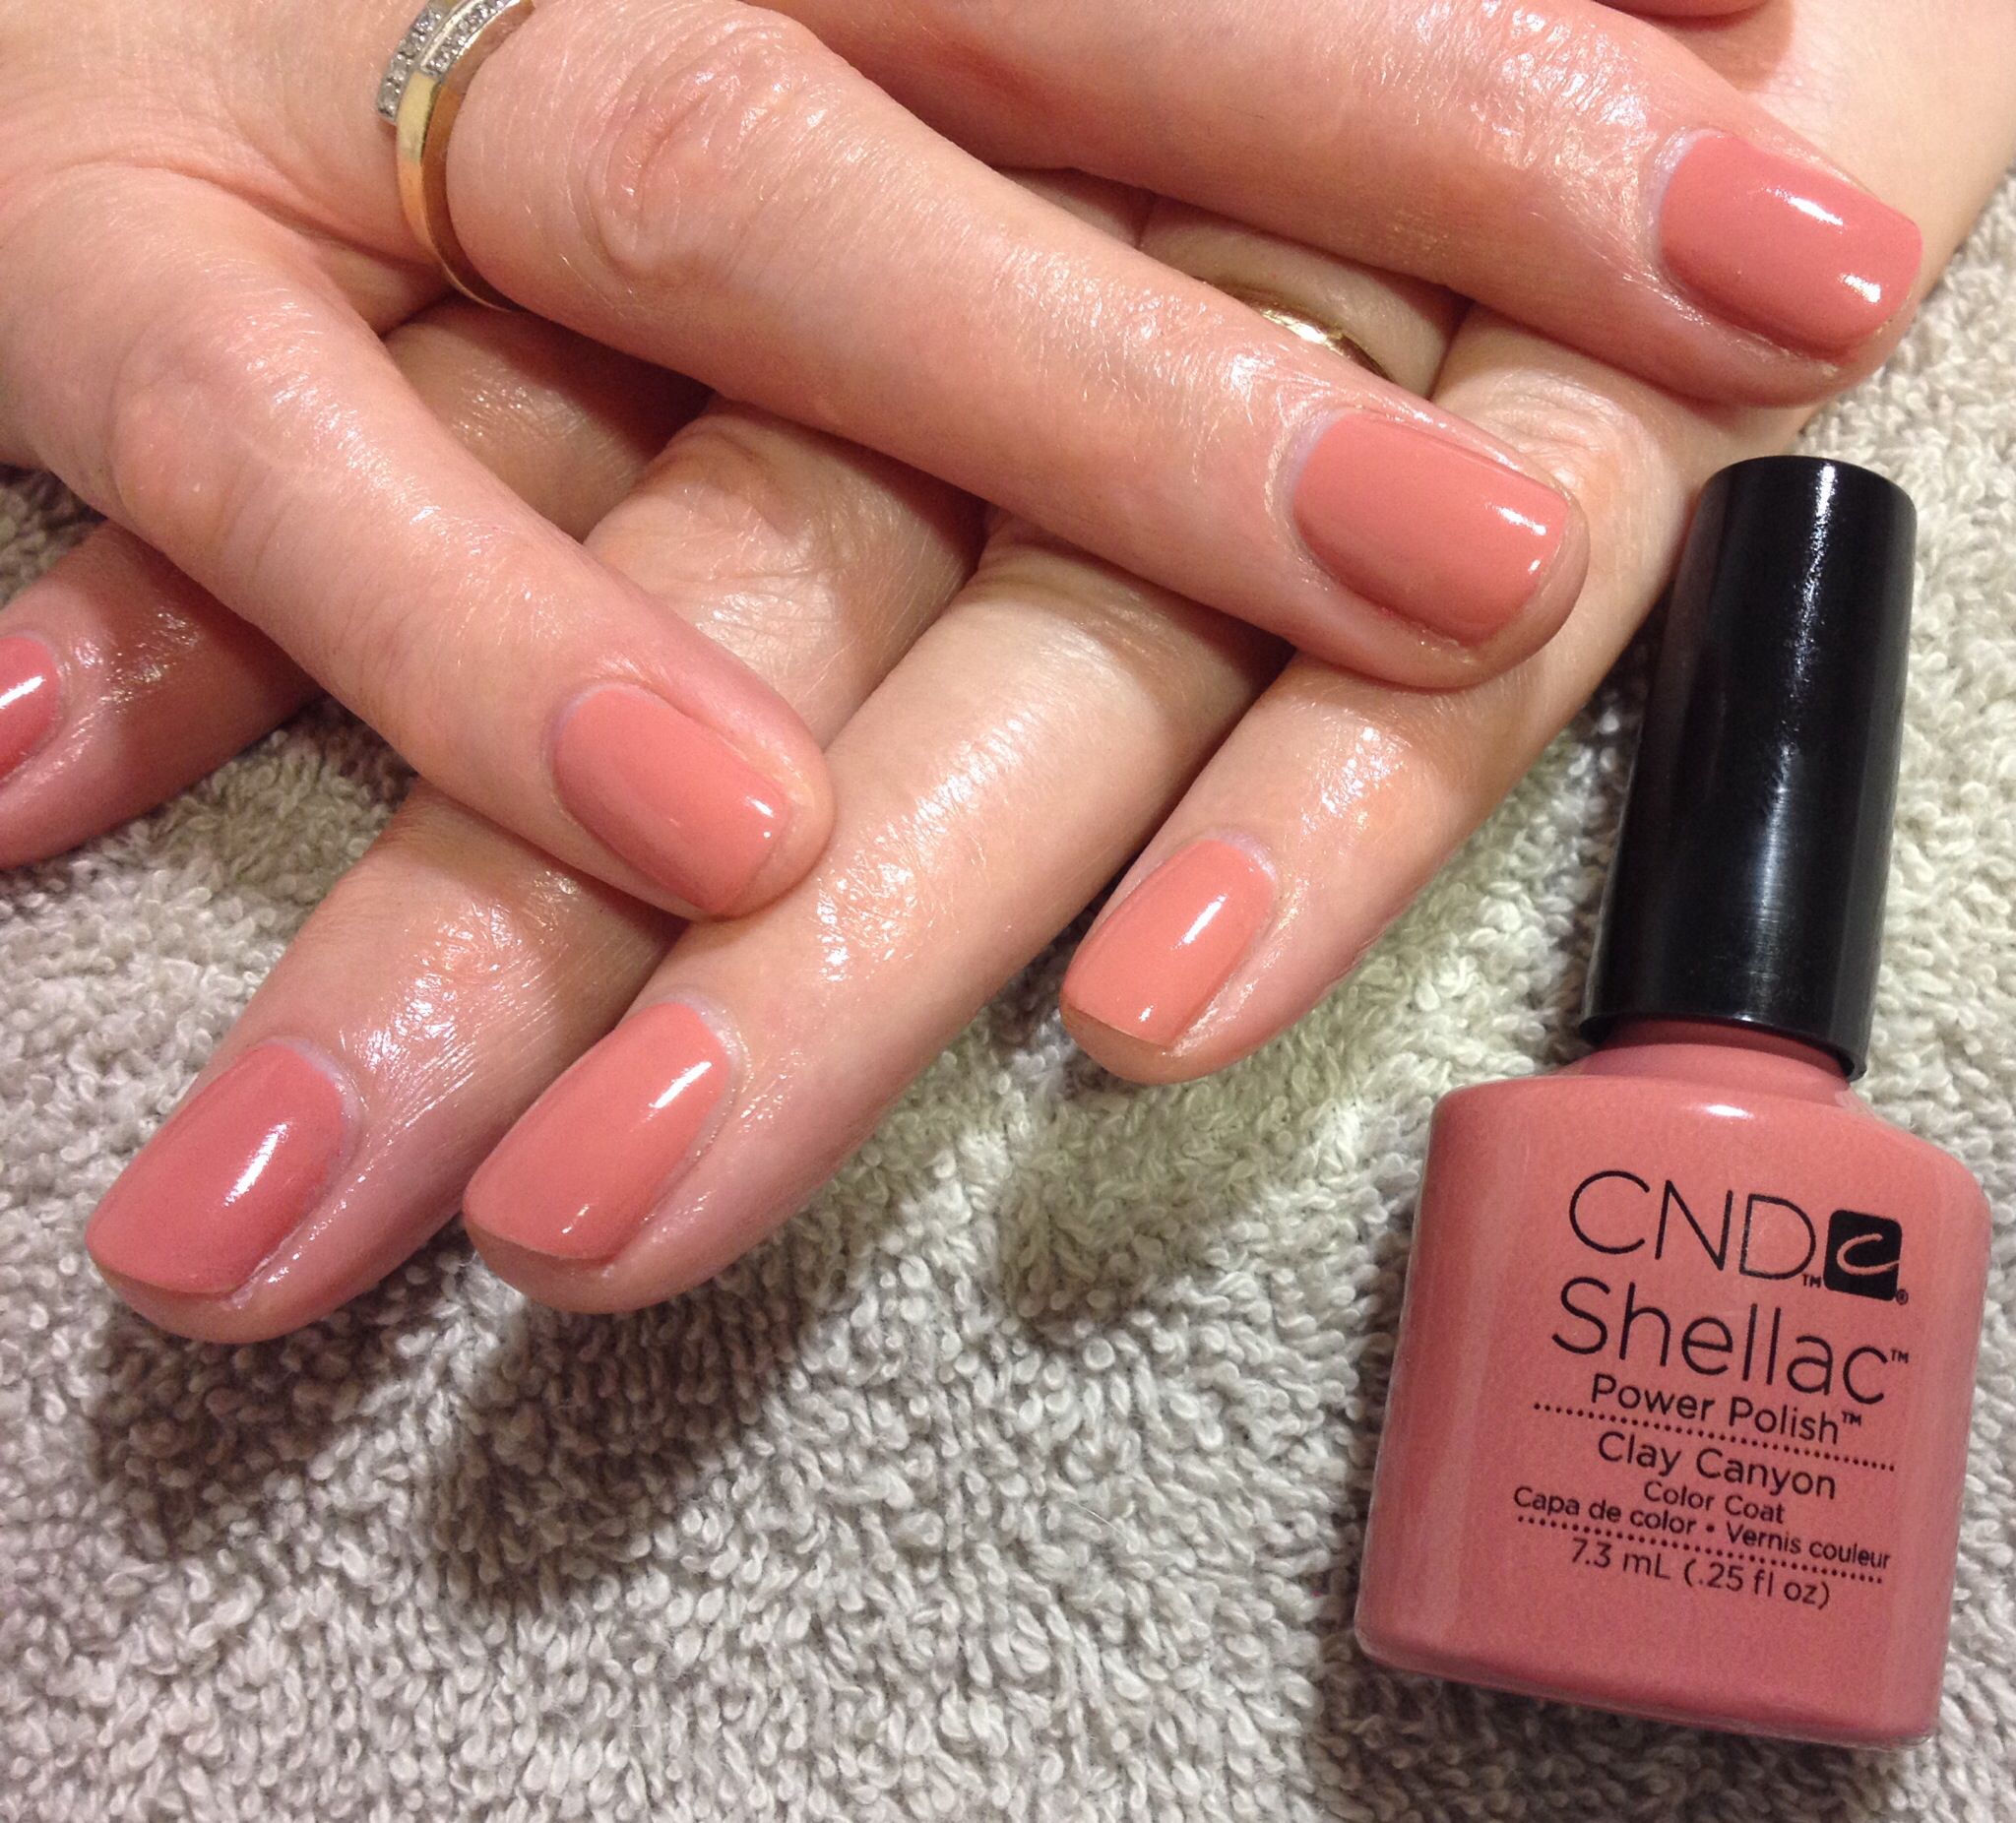 Shellac Clay Canyon Gel Manicure Colors Cnd Shellac Nails Shellac Nail Colors